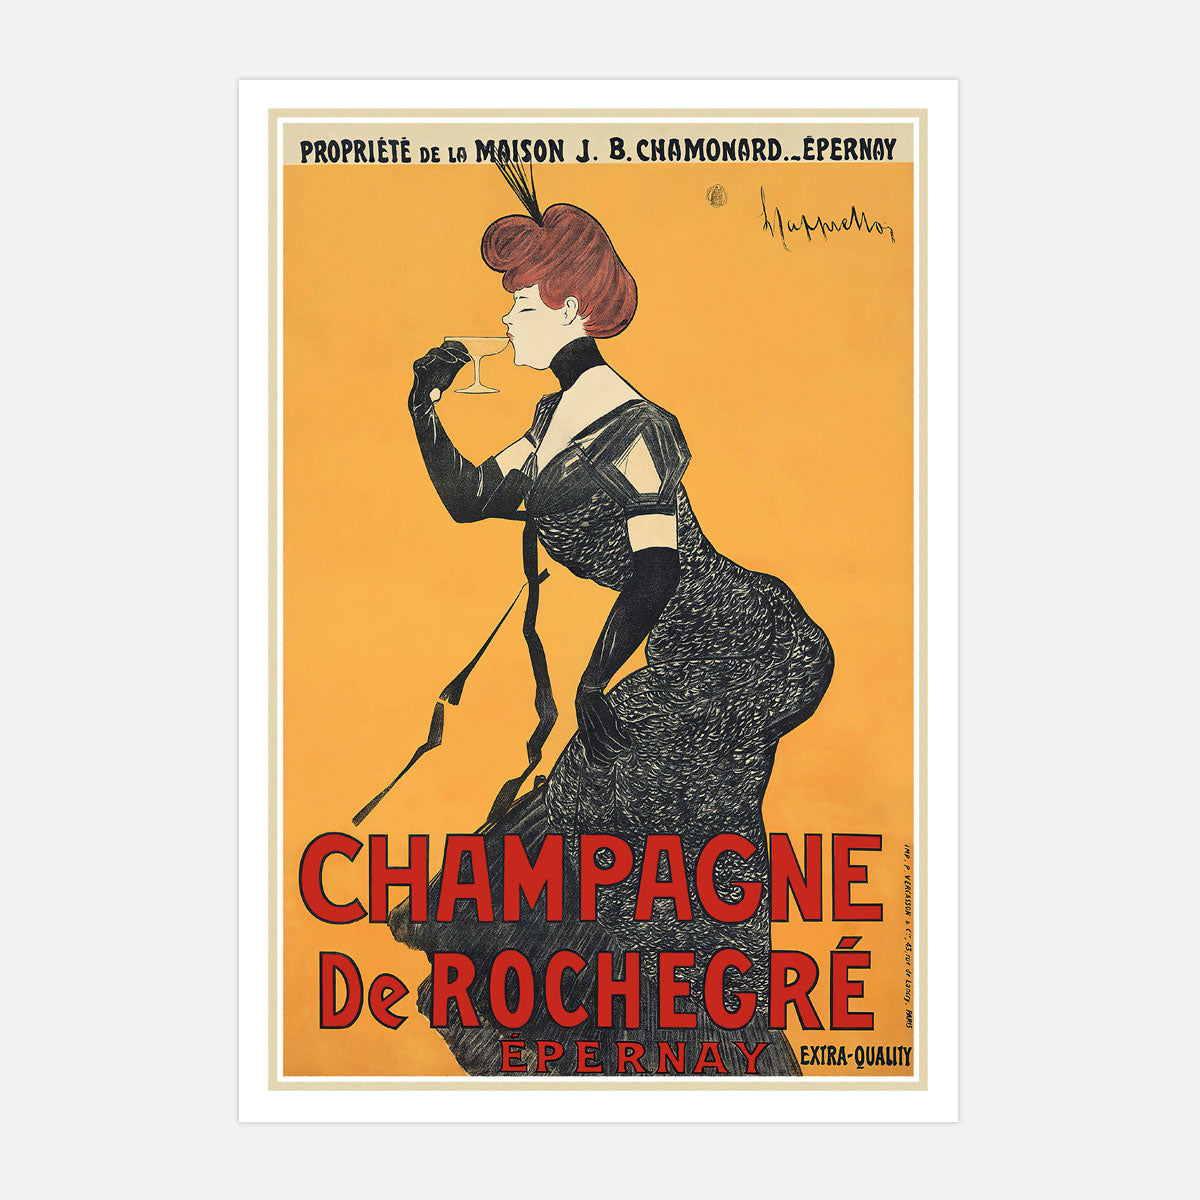 French Champagne De Rochegre vintage retro advertising poster from Places We Luv